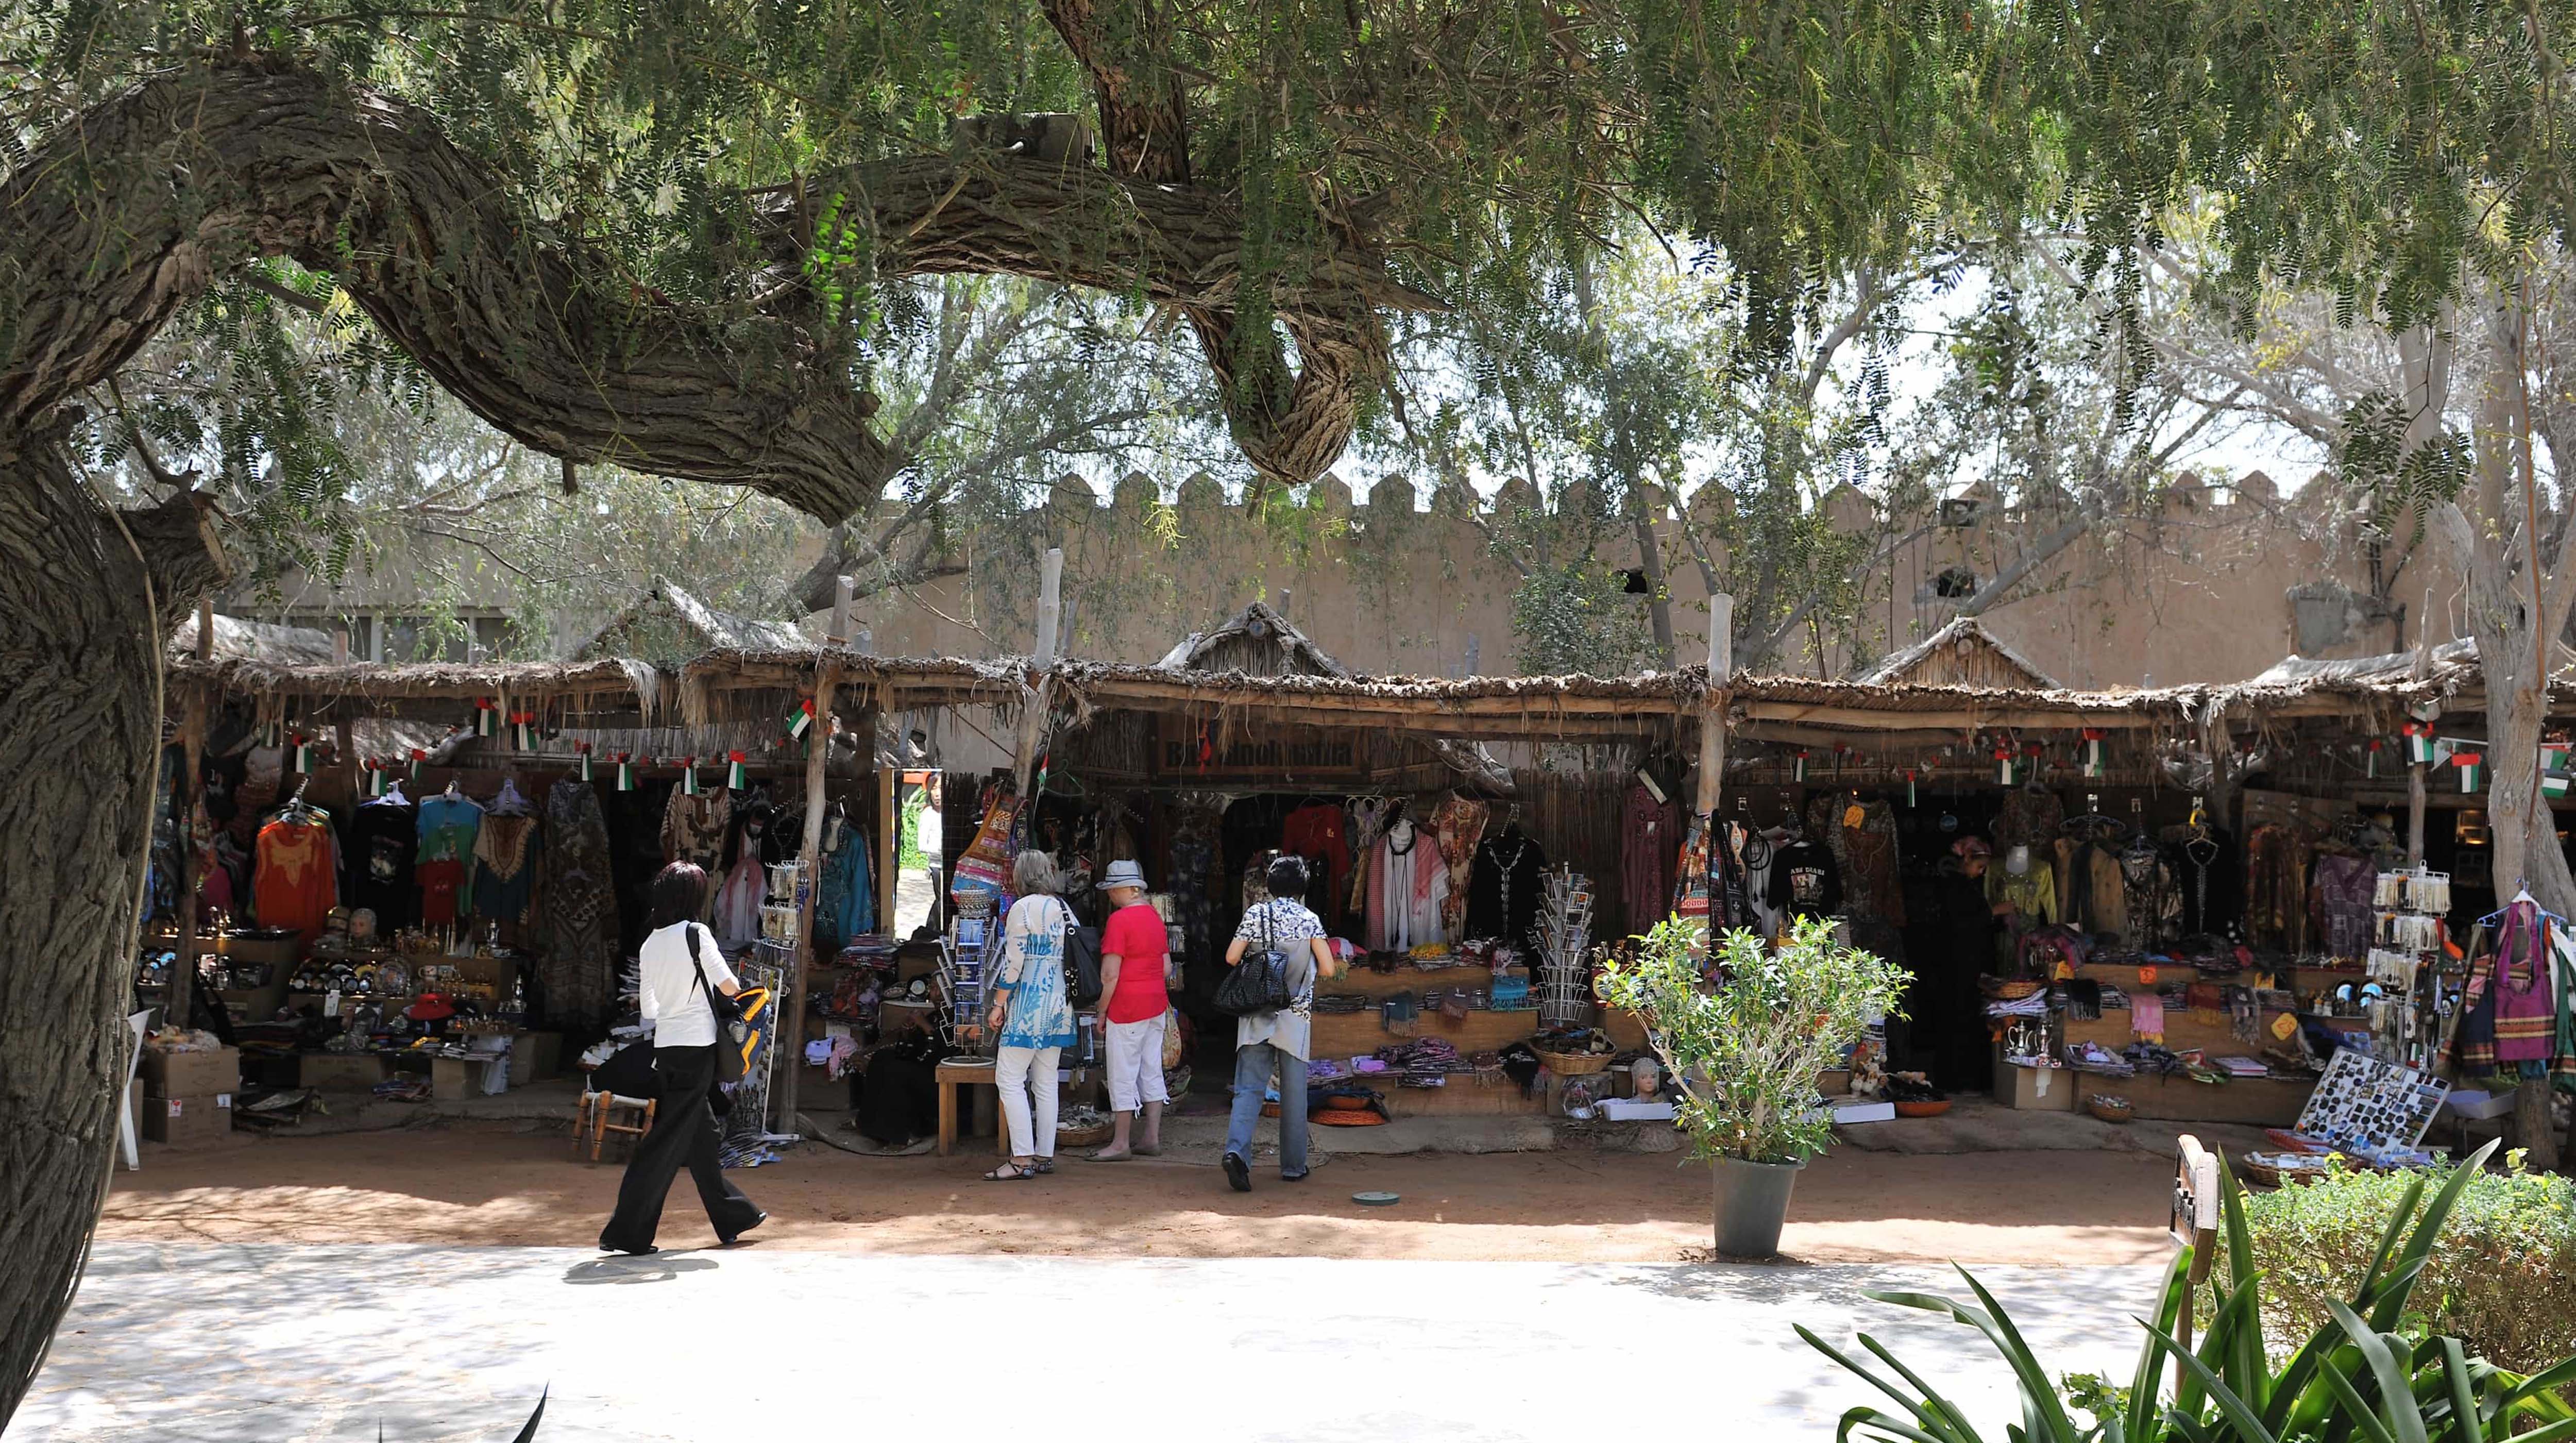 Tourists shopping for souvenirs at the traditional market in Heritage Village